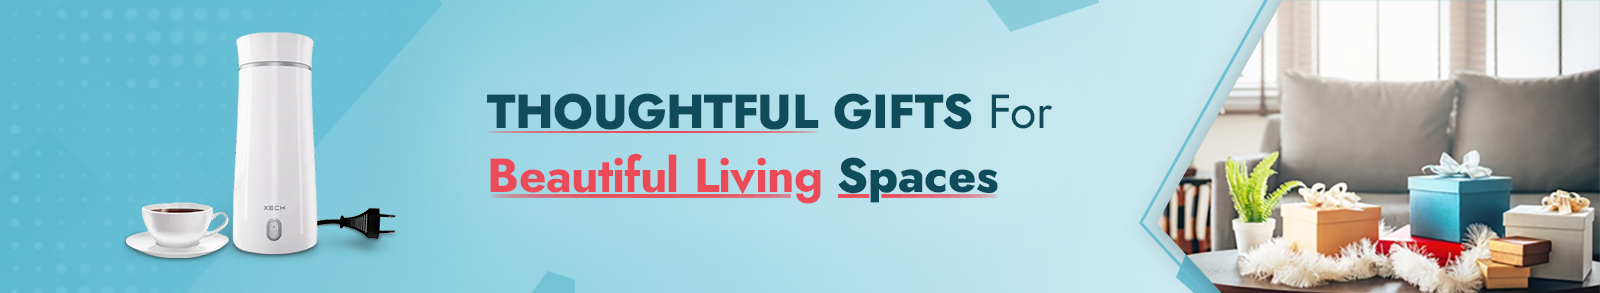 Thoughtful Gifts For Beautiful Living Spaces